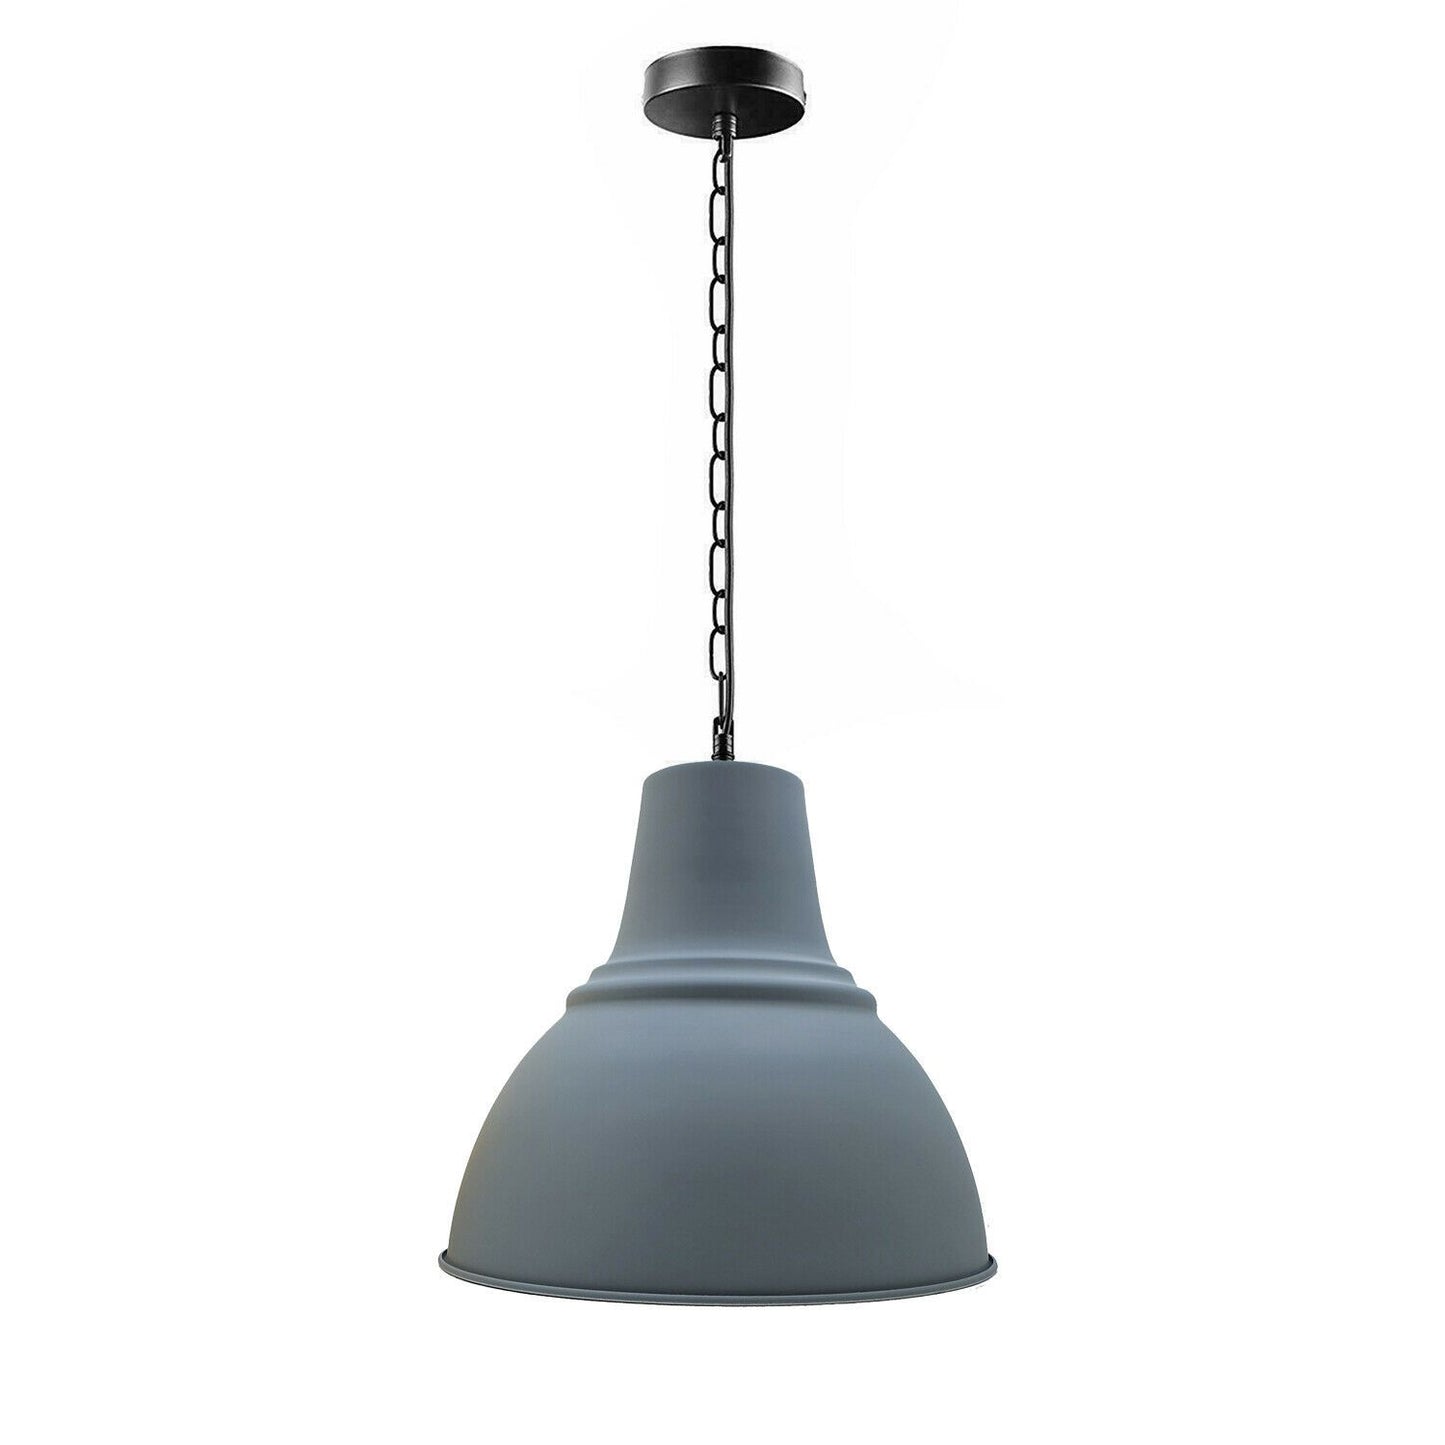 Retro Industrial Wheel Guard Dome Shade Ceiling Pendant Lights